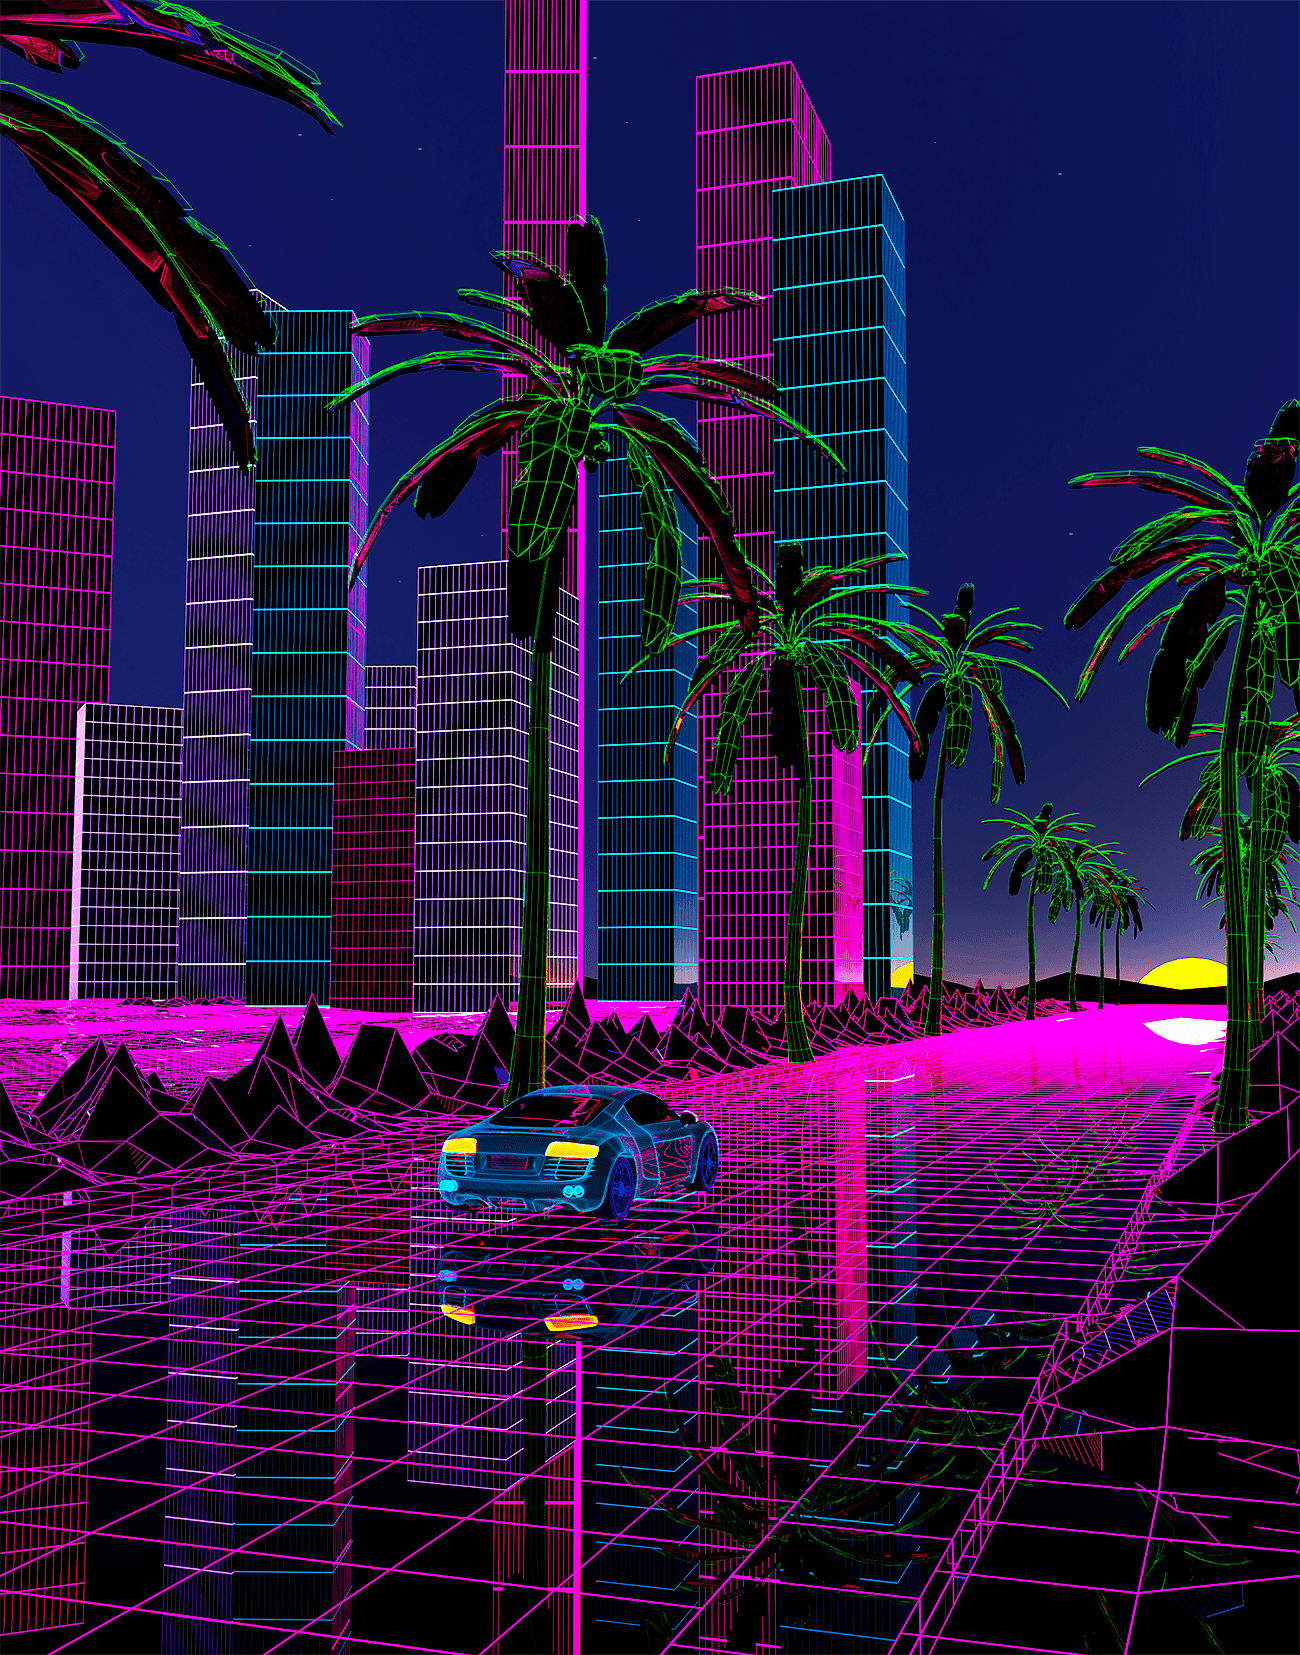 A city with palm trees and buildings - Vaporwave